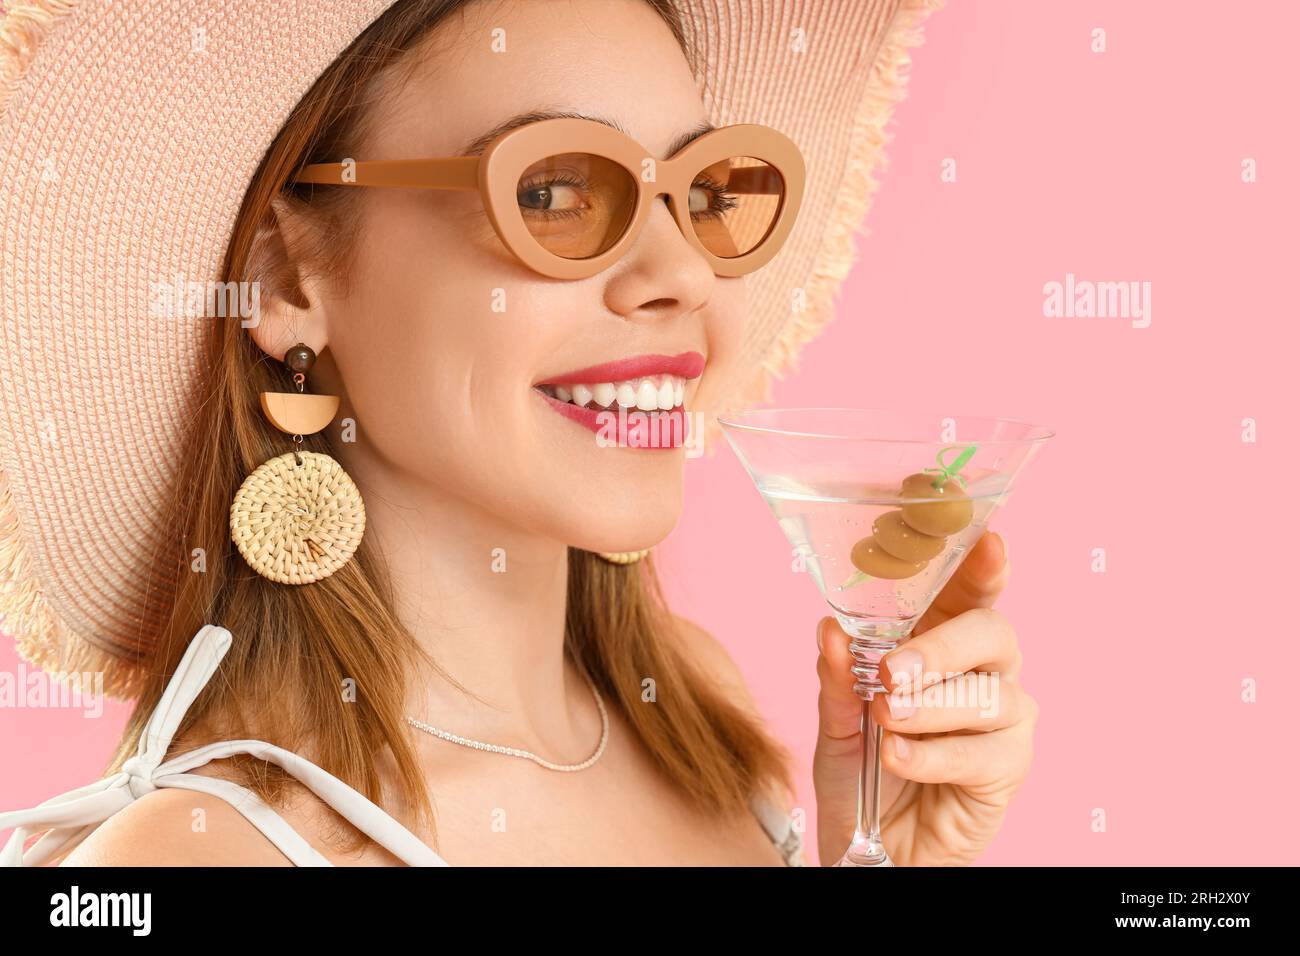 Beautiful young woman in wicker hat with glass of martini on pink background Stock Photo